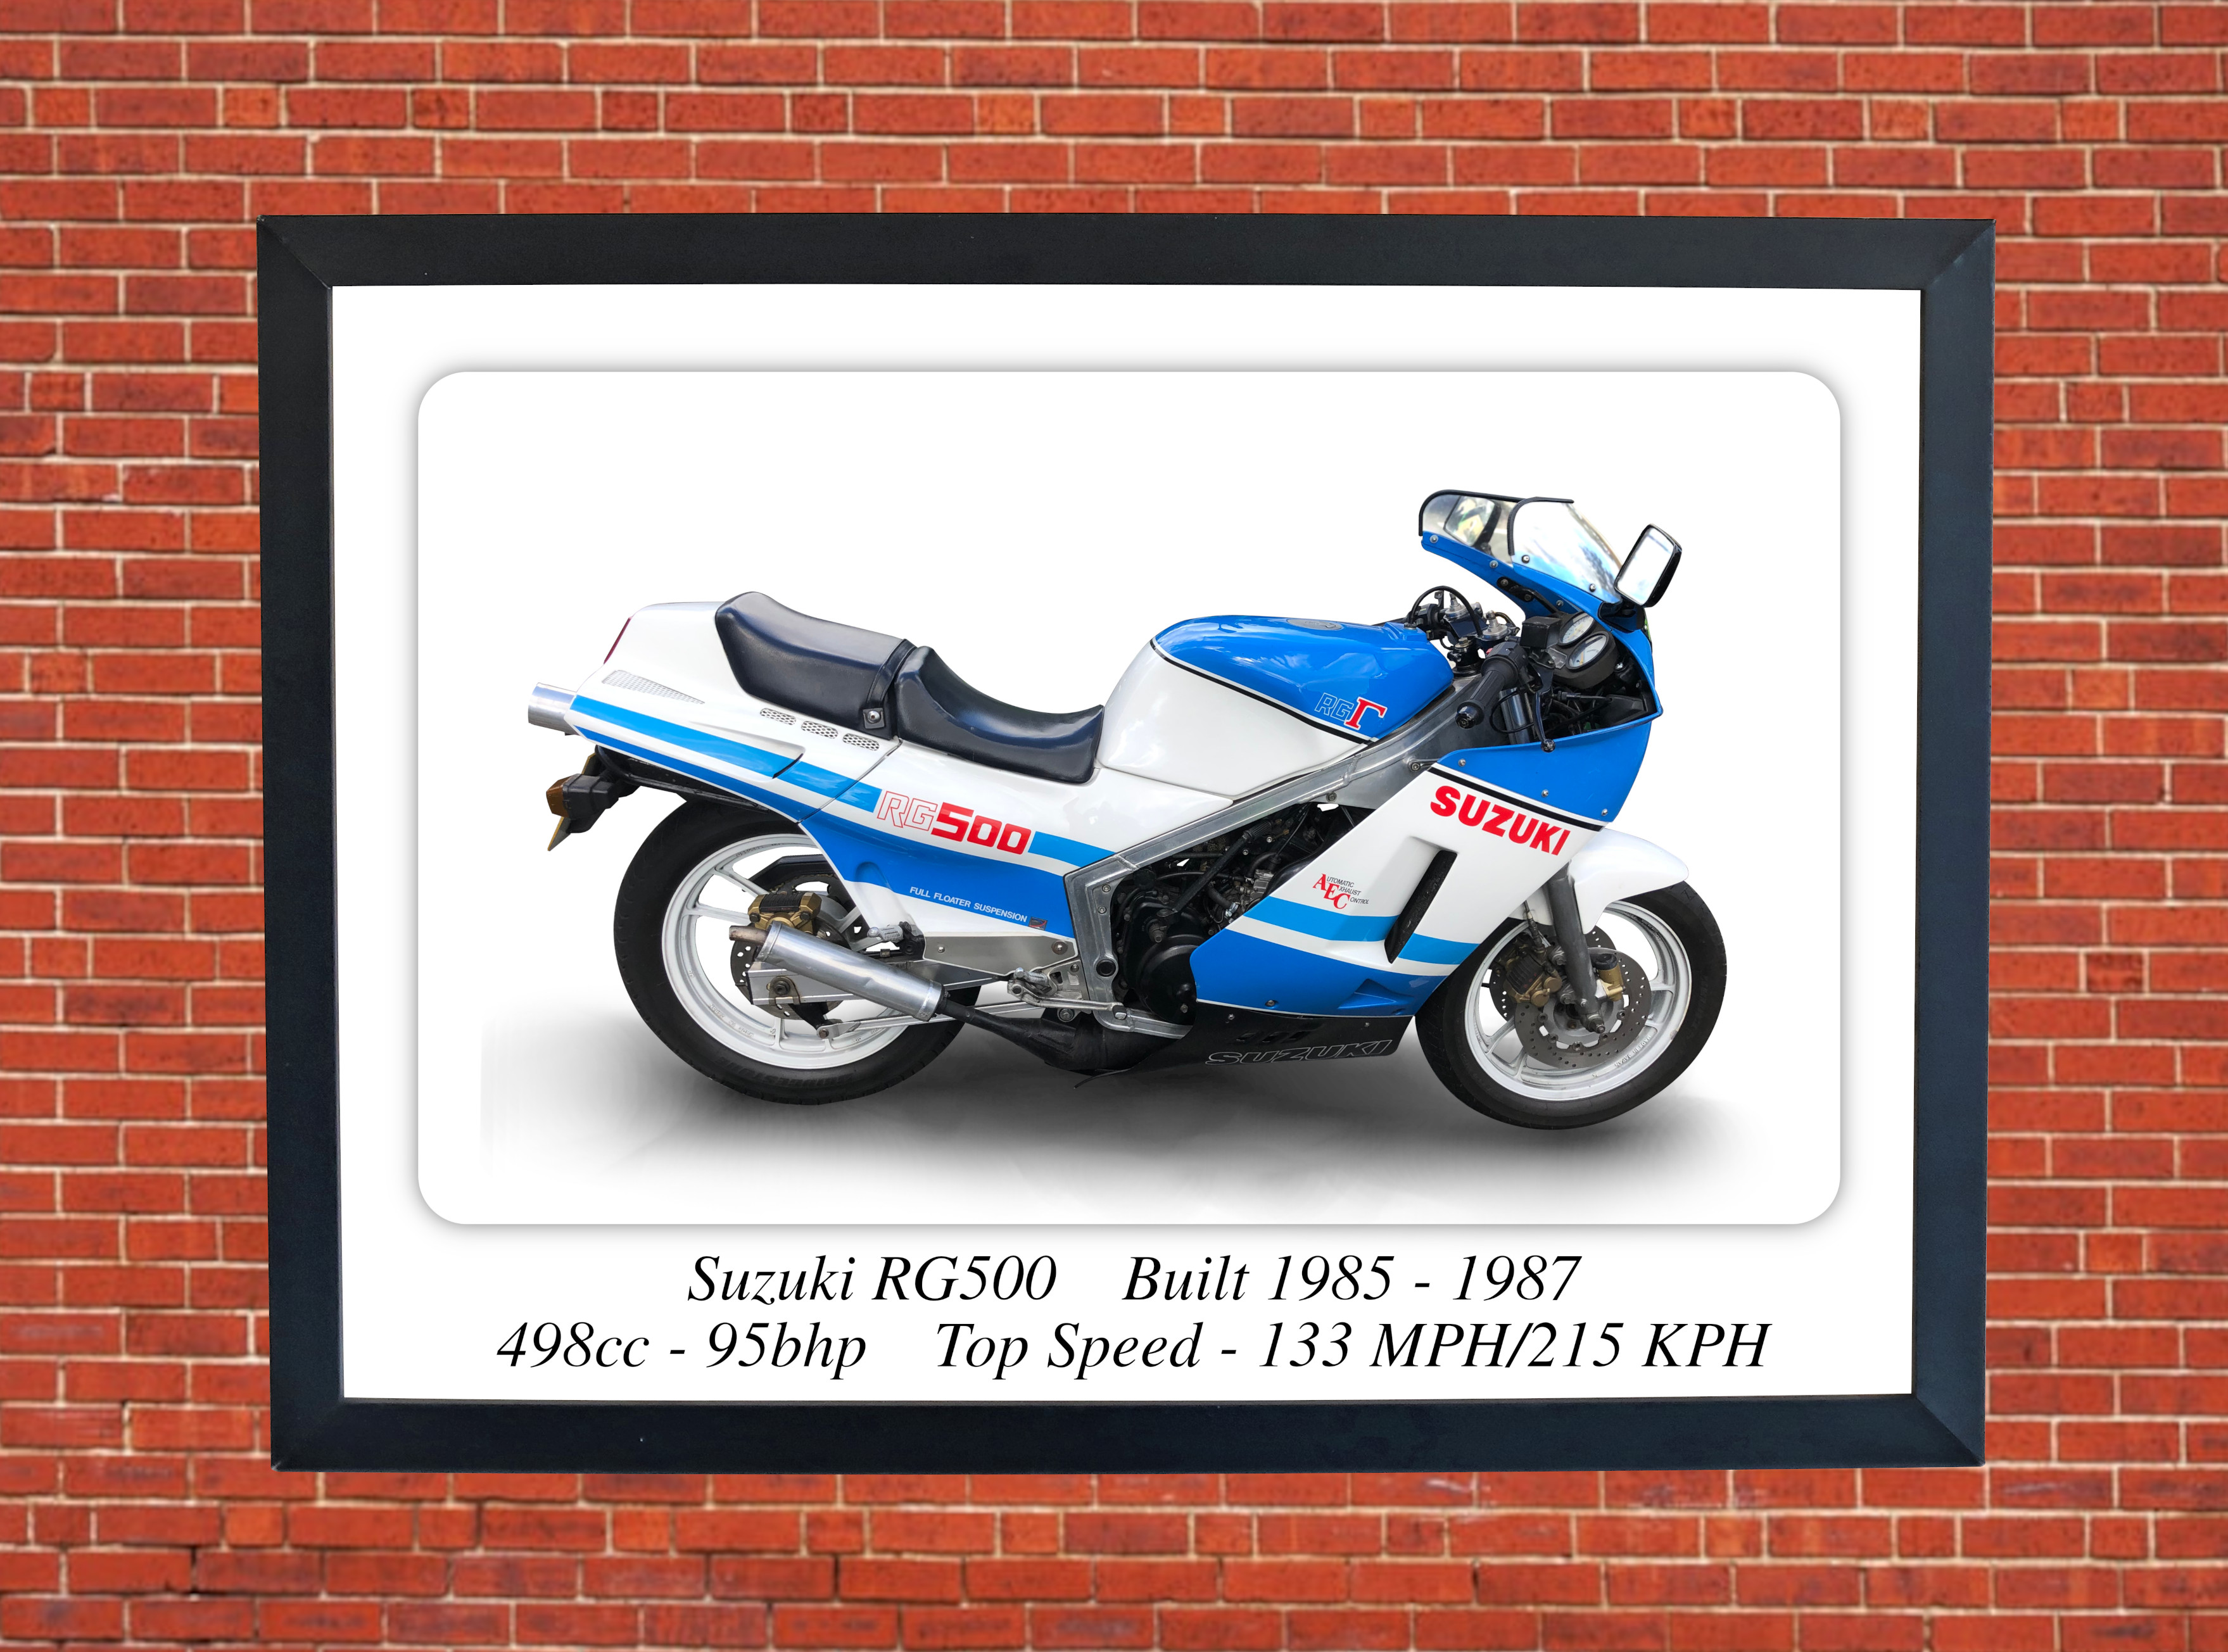 Suzuki RG500 "Gamma" Classic Motorcycle - A3/A4 Size Print Poster